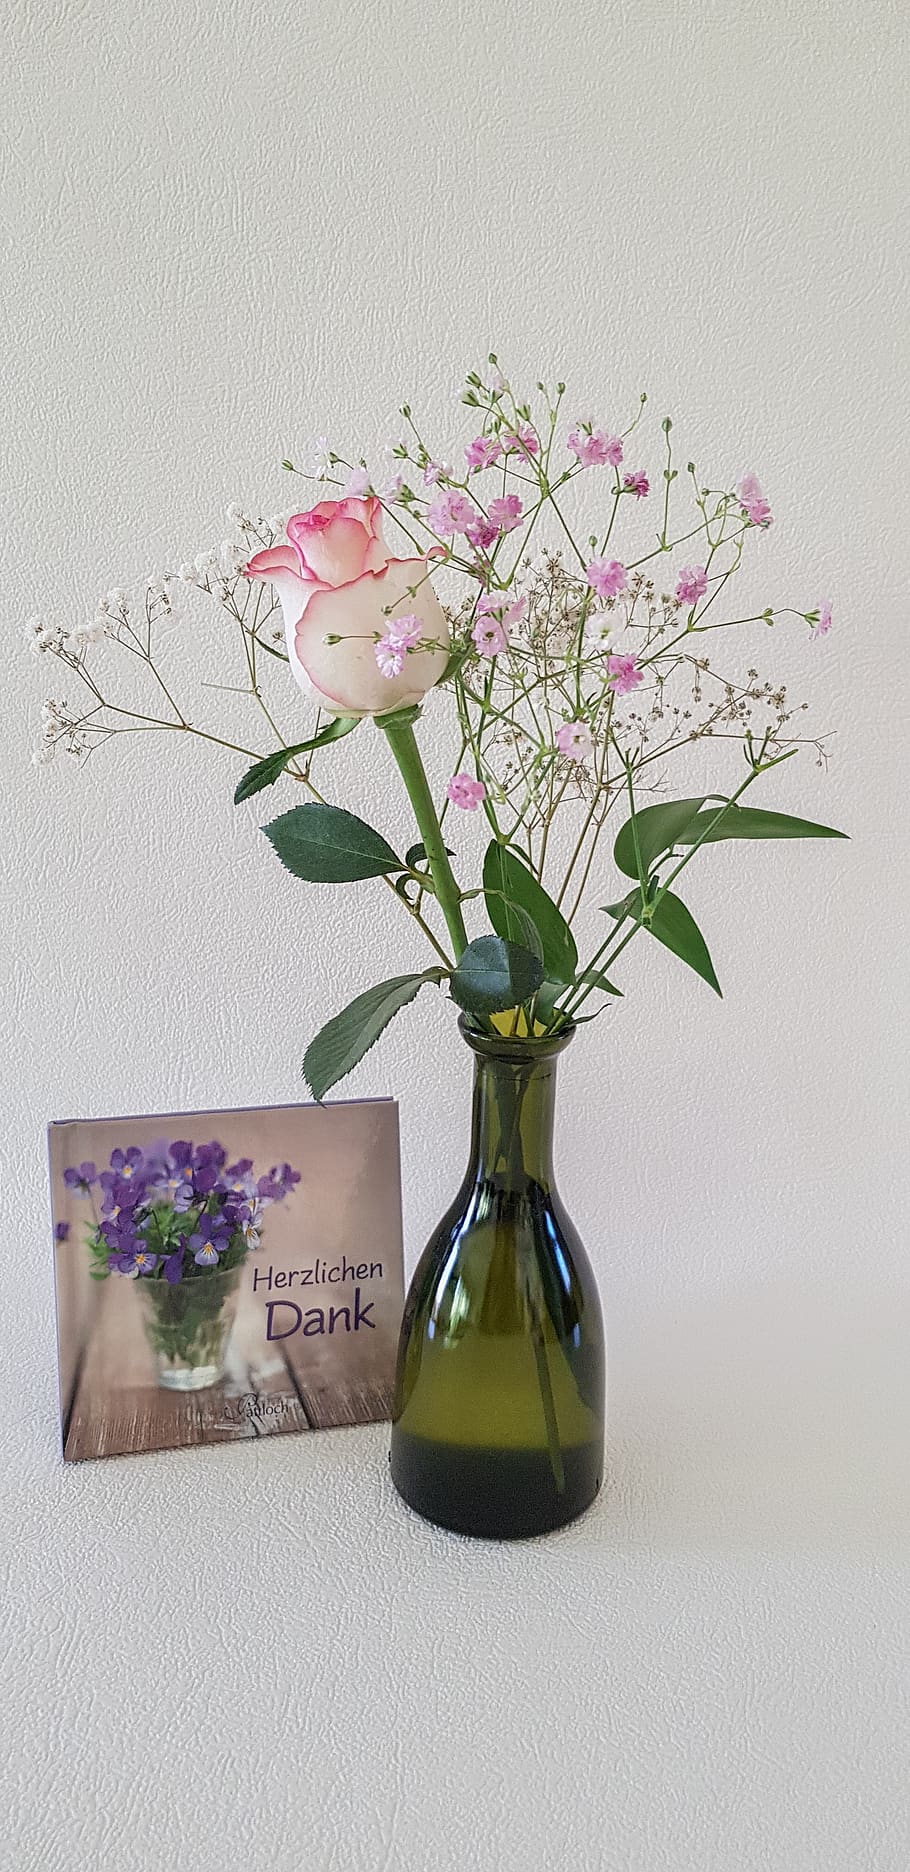 rose, gypsophila, white pink, flower, plant, leaf, glass vase dark green, book, thanks to congratulations, thank you